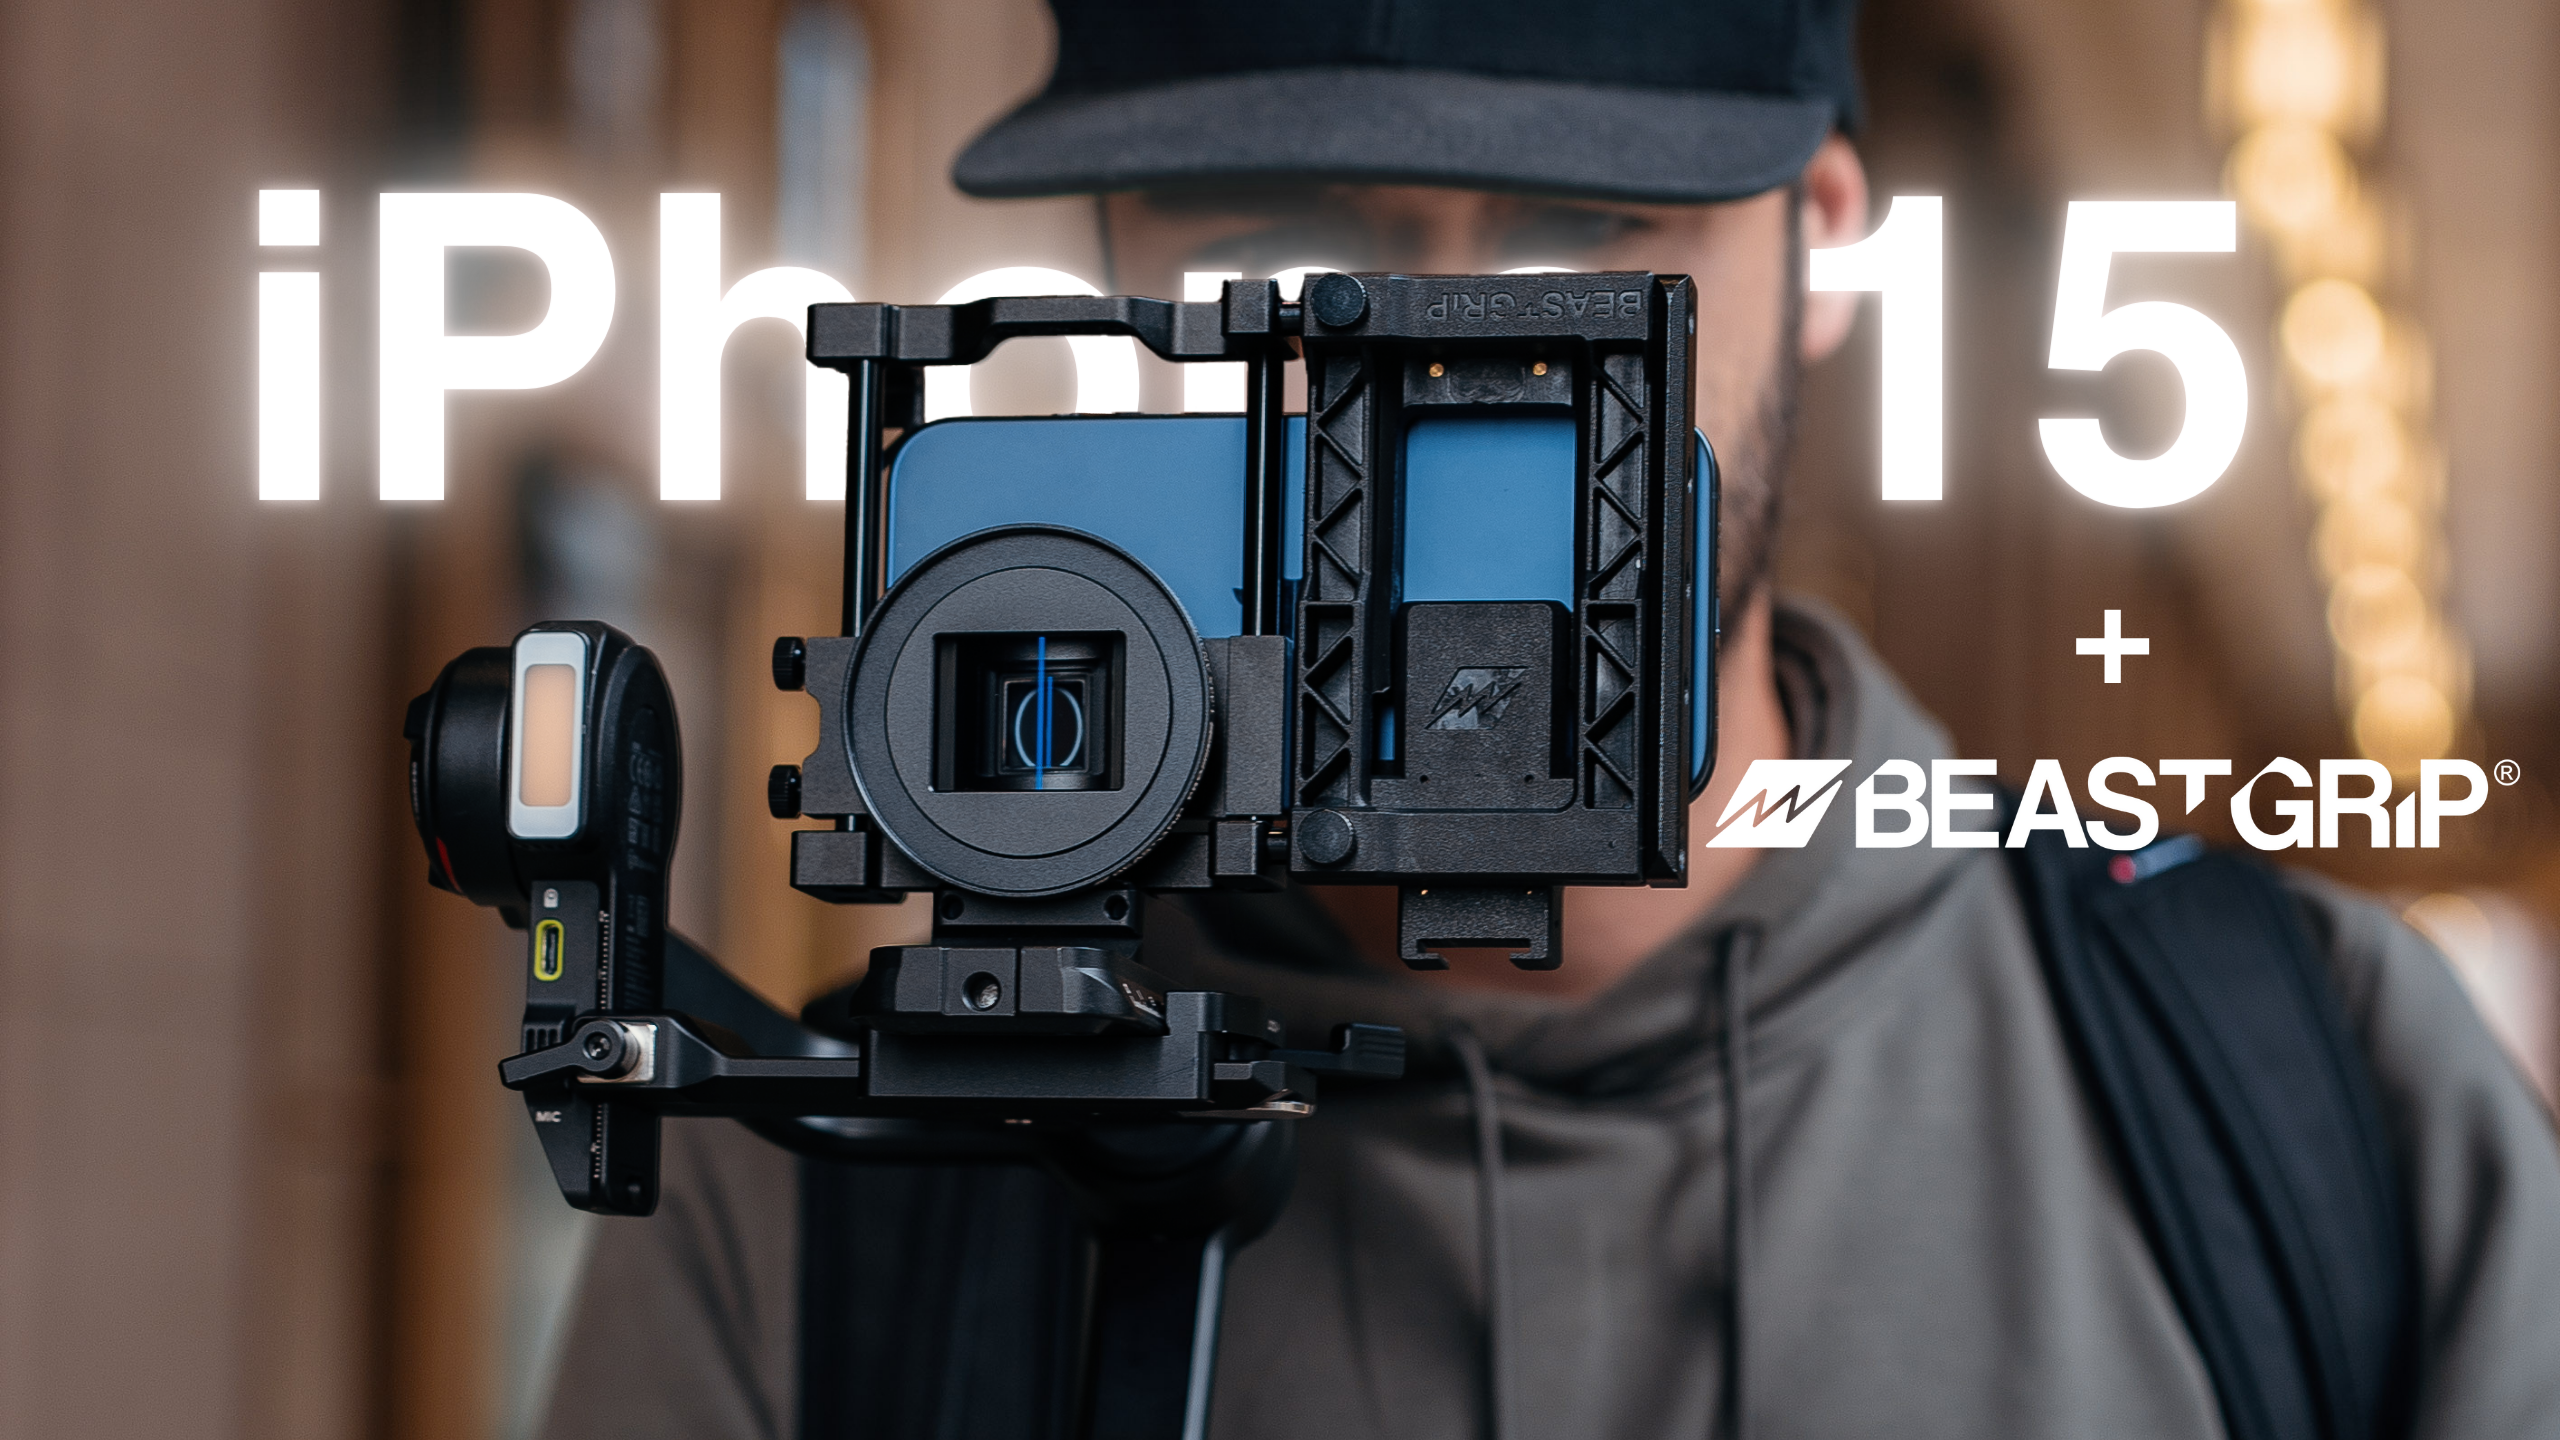 iPhone 15 and Beastgrip Gear. Lenses and camera cages for iPhone